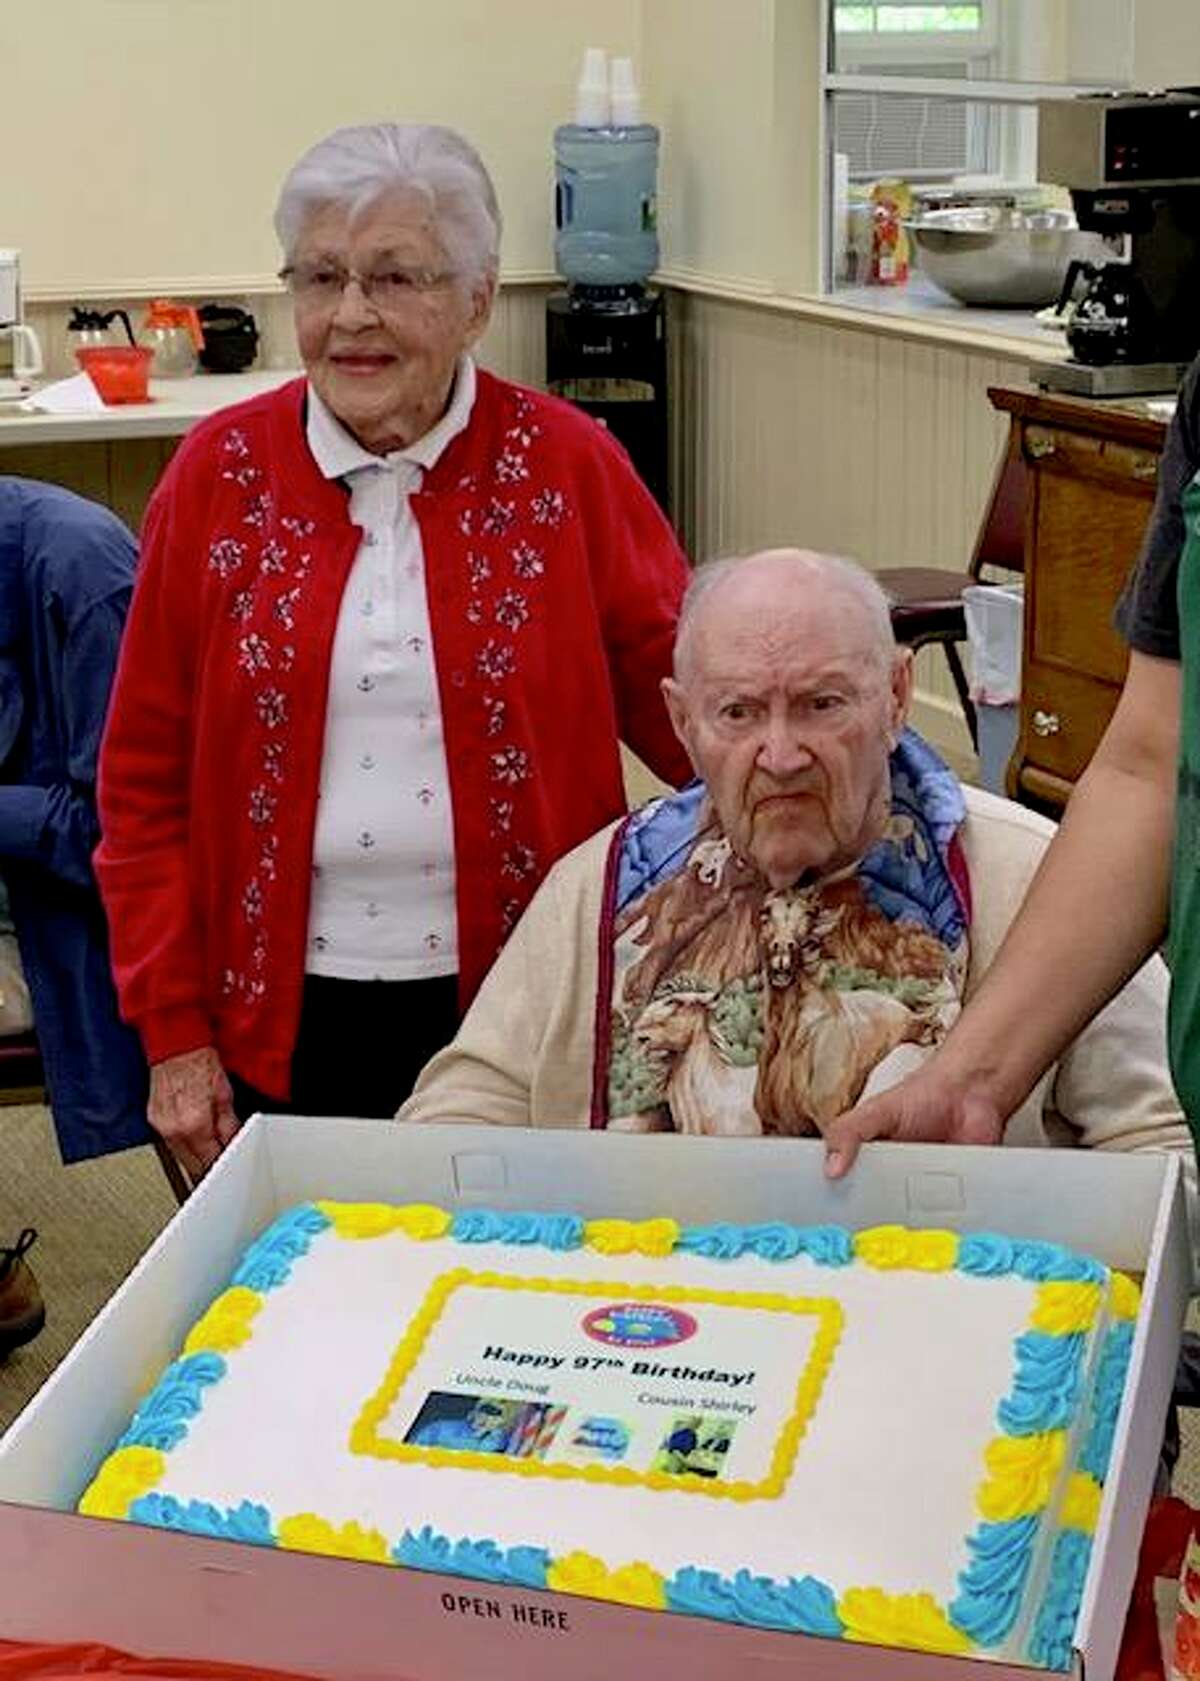 Lifelong Barkhamsted resident Doug Roberts and Winsted resident Shirley Moore were both feted with a joint birthday party celebration at the Barkhamsted Senior Center hosted by Lorraine Paul and Dave Roberts.